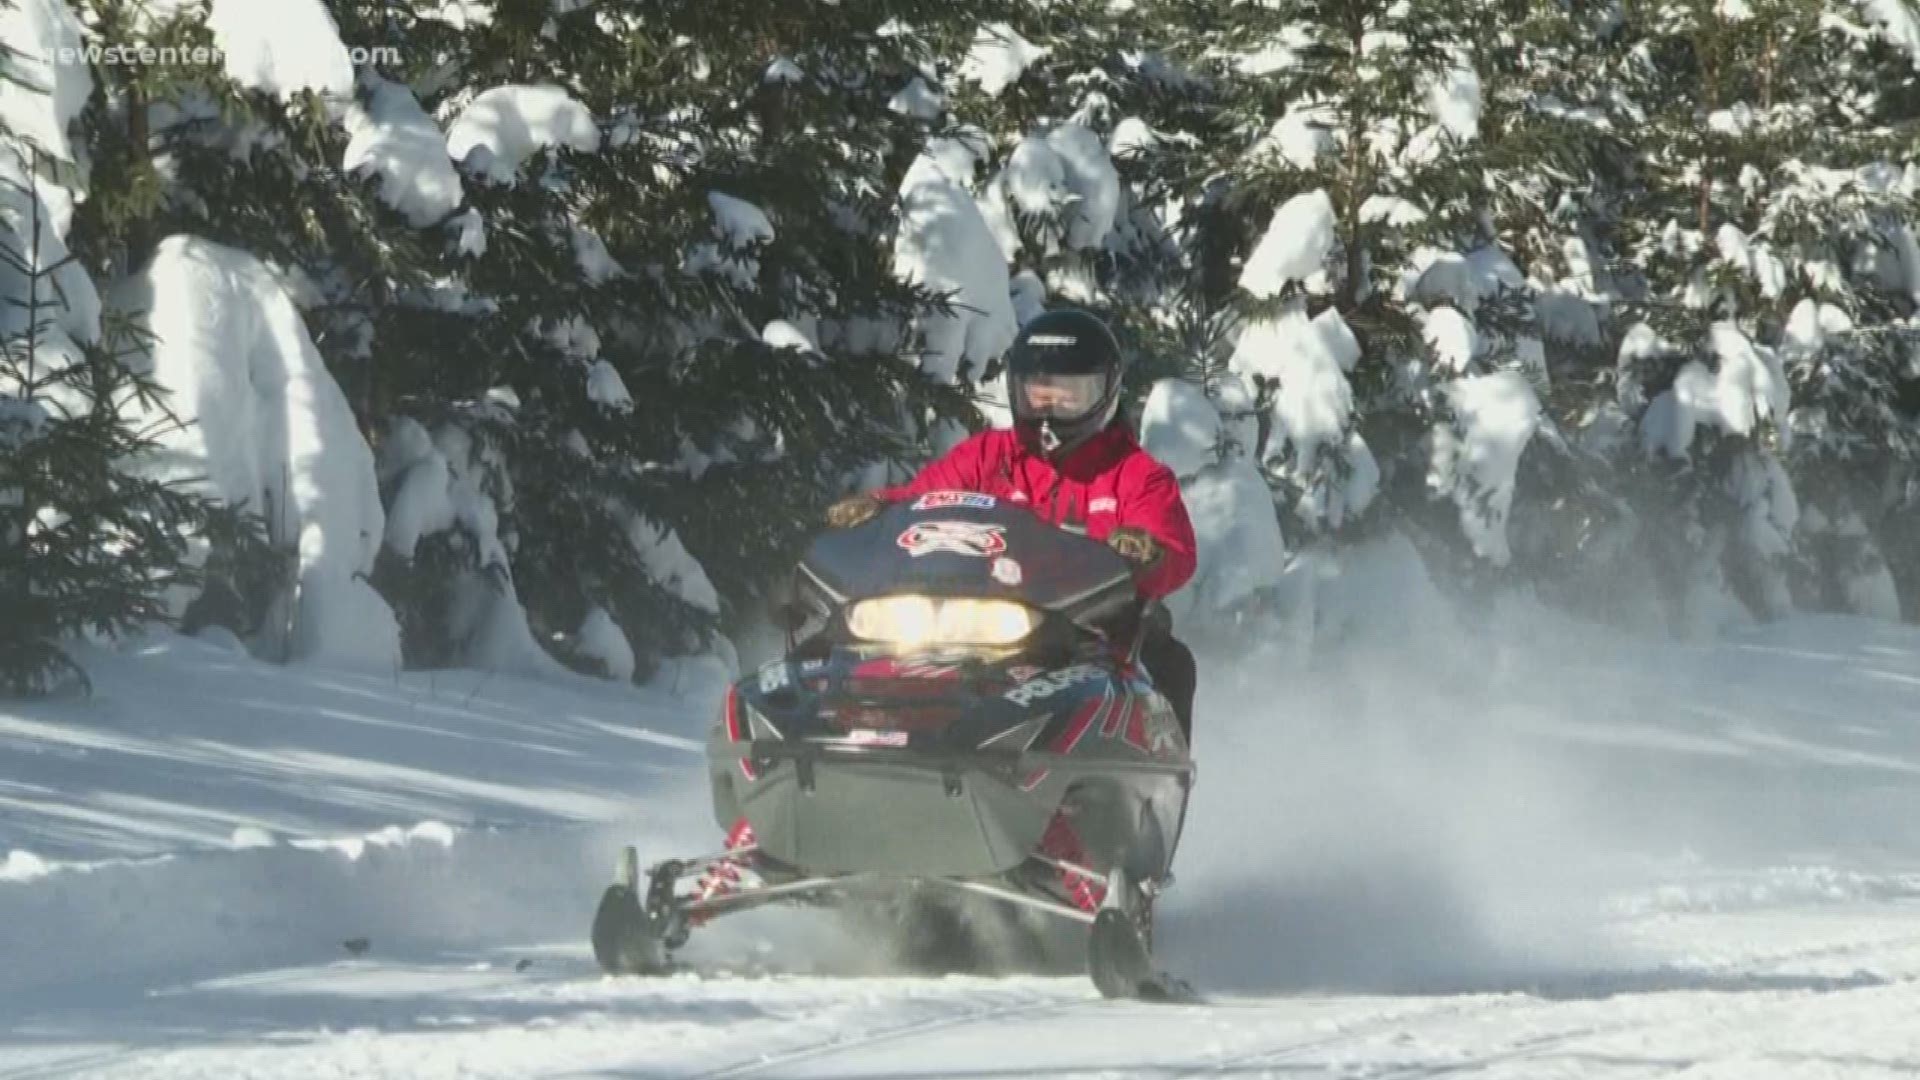 NEWS CENTER Maine's Bill Green discusses proper snowmobiling etiquette to protect landowners' properties during the winter.